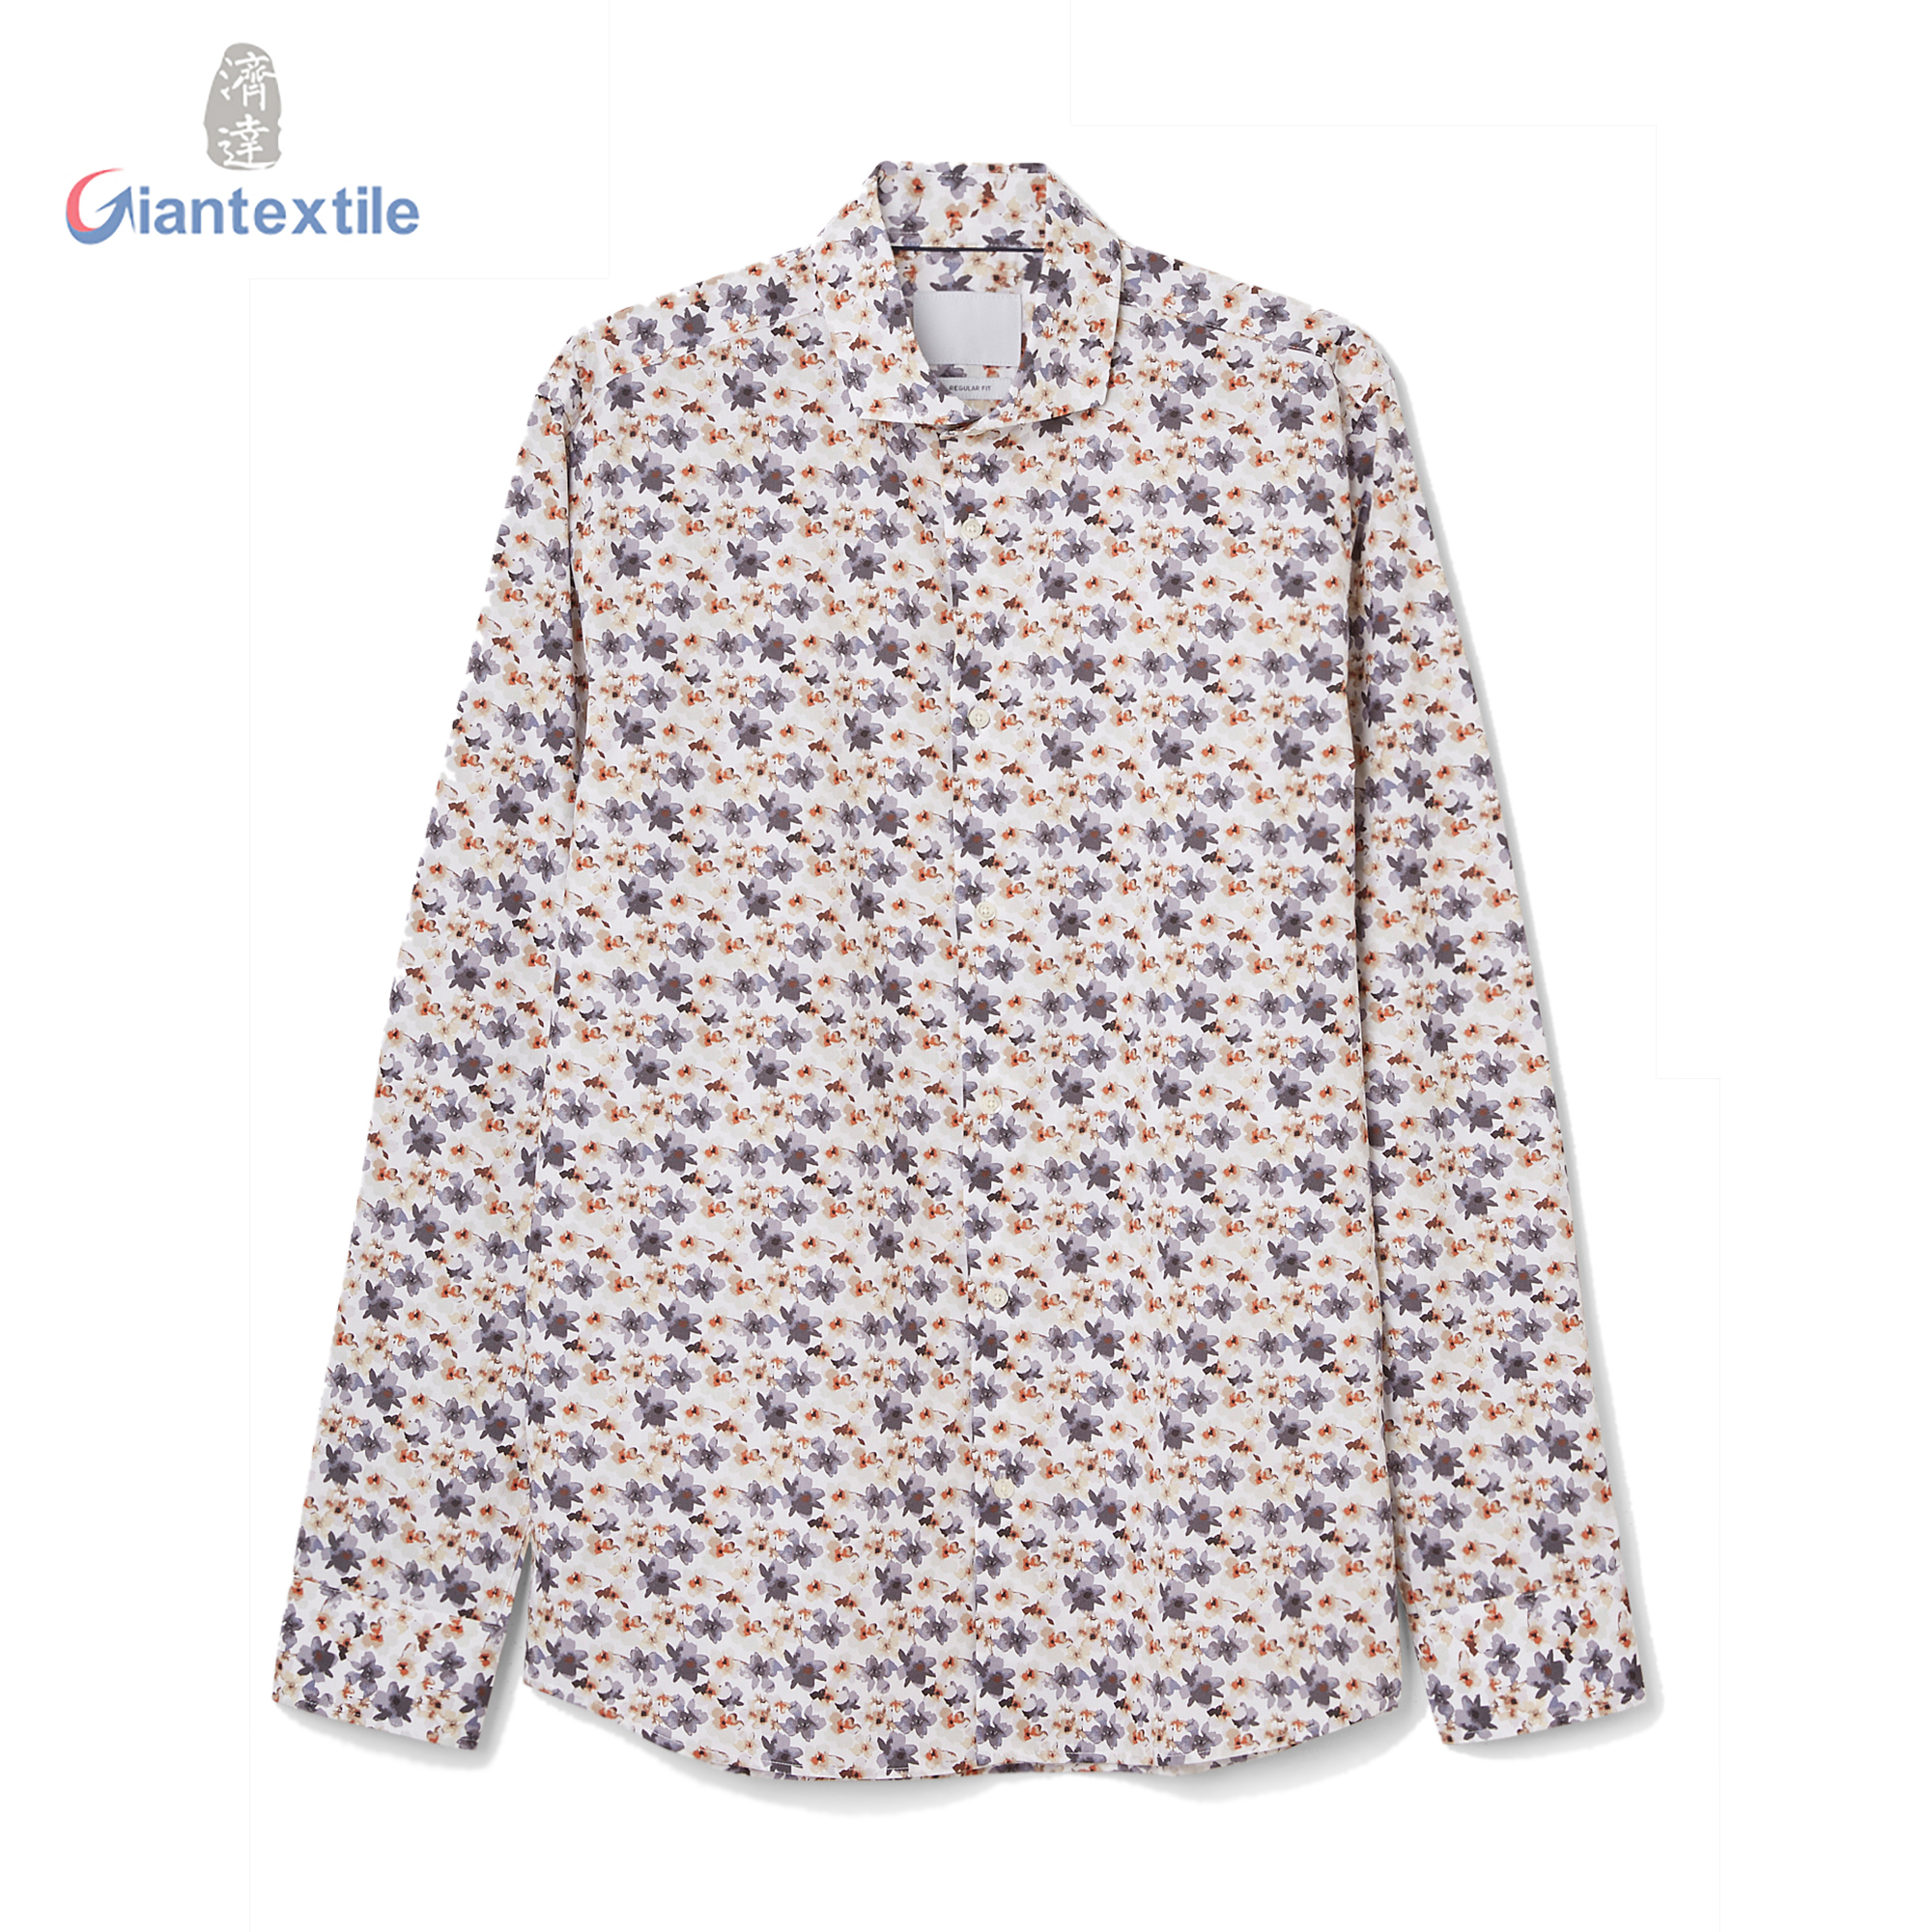 Men’s Print Shirt 100% BCI Cotton Small Calico Smart Casual Good hand feel Gent Fashionable Competitive Price GTCW107638G1